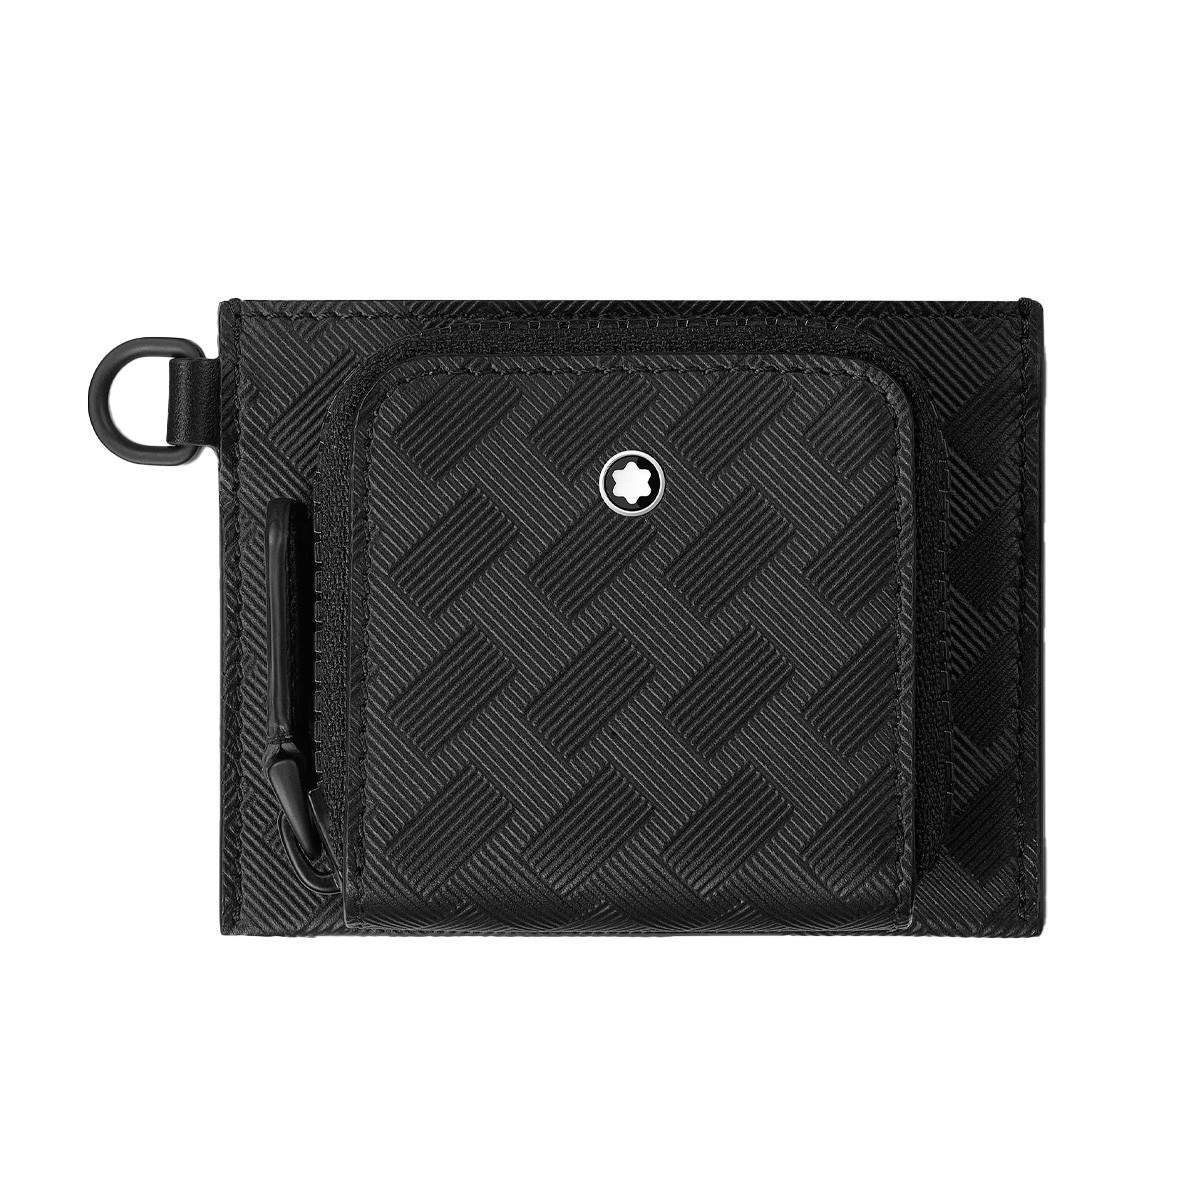 Montblanc Extreme 3.0 card holder 6cc - Luxury Card cases – Montblanc® LV